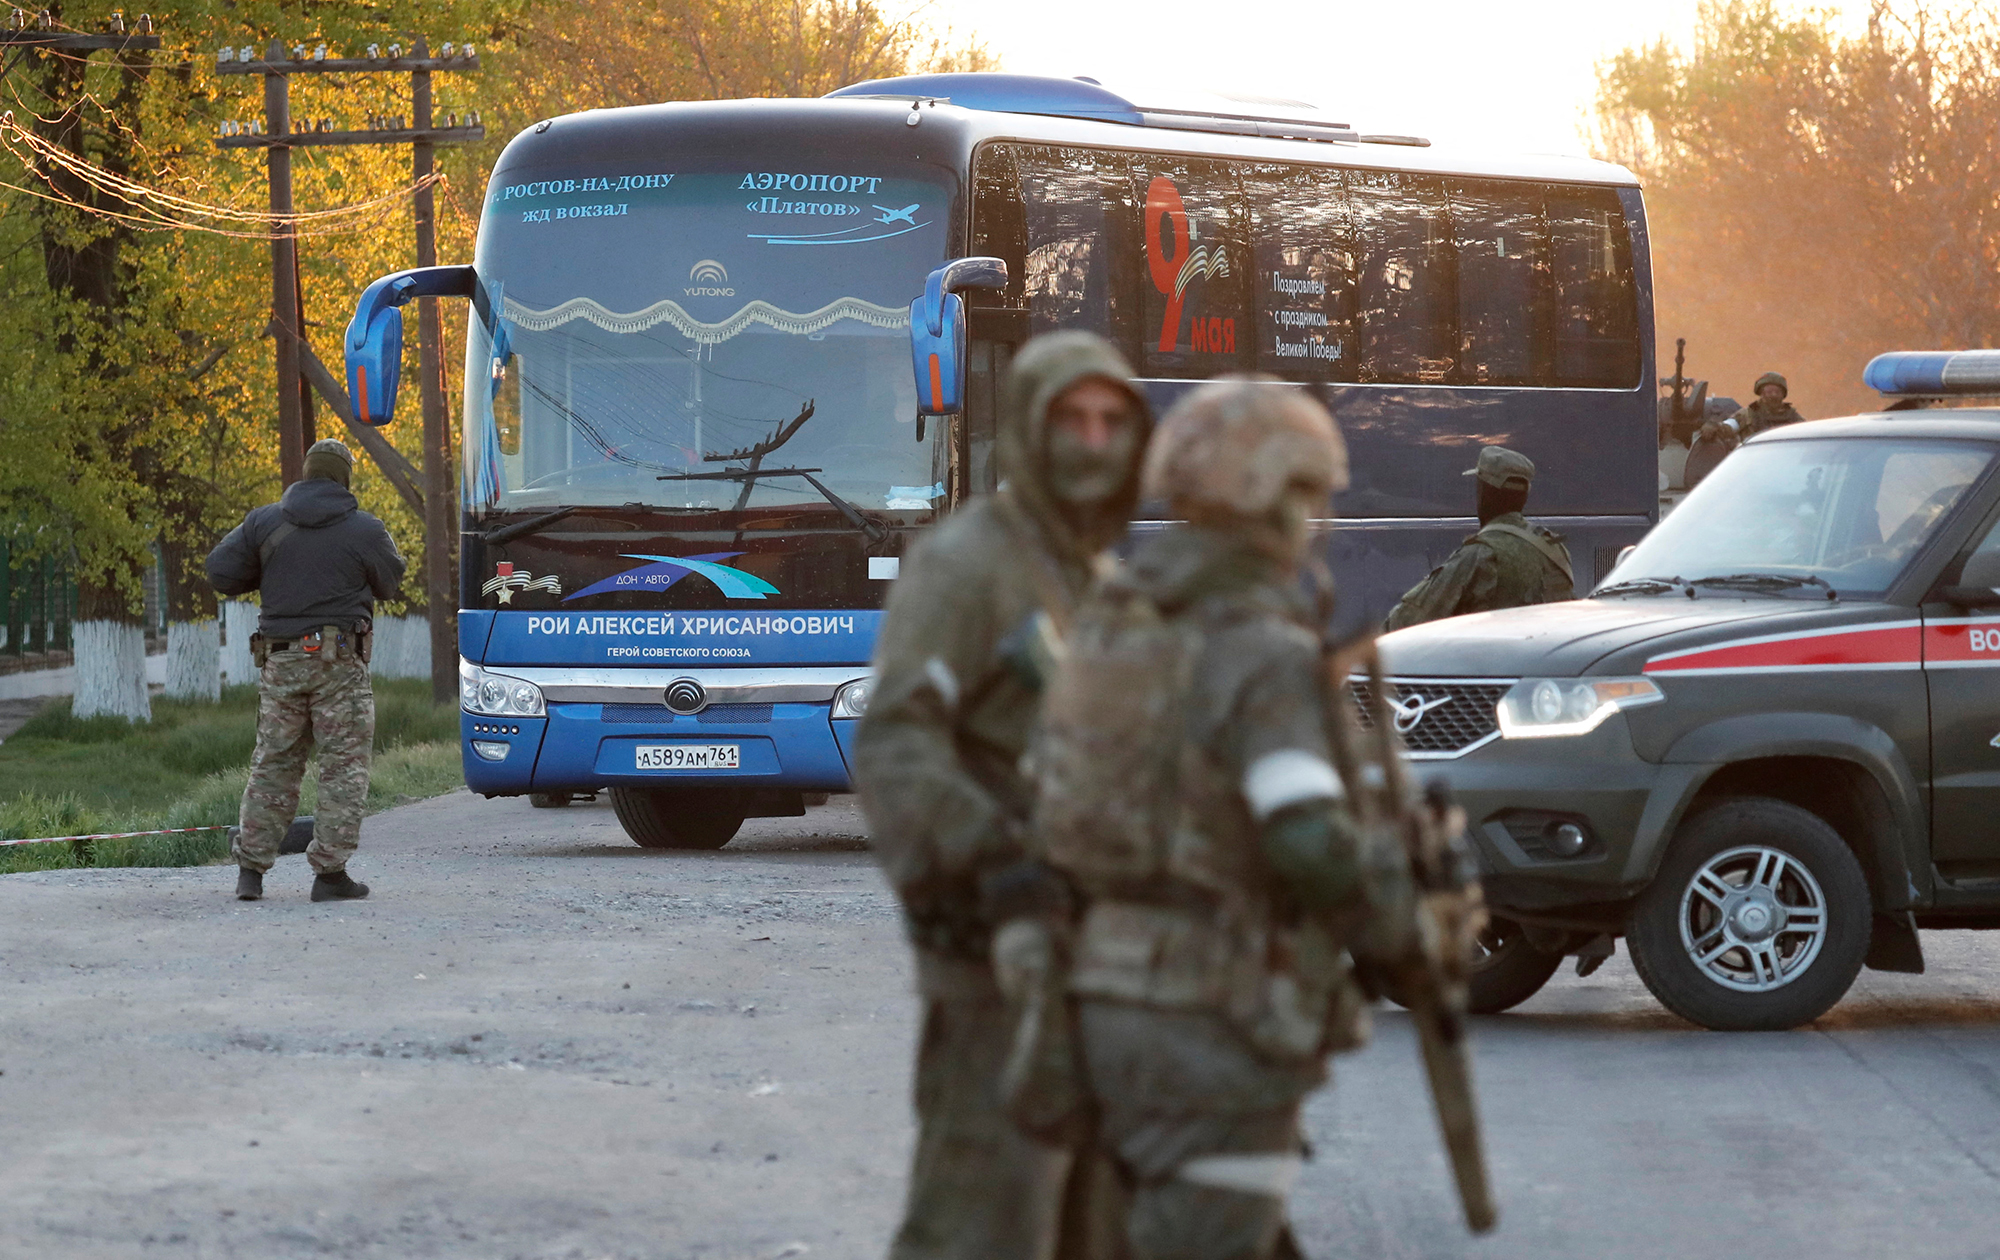 A bus carrying civilians evacuated from Azovstal steel plant in Mariupol arrives at a temporary accommodation center in the village of Bezimenne, Ukraine on May 6, 2022. 